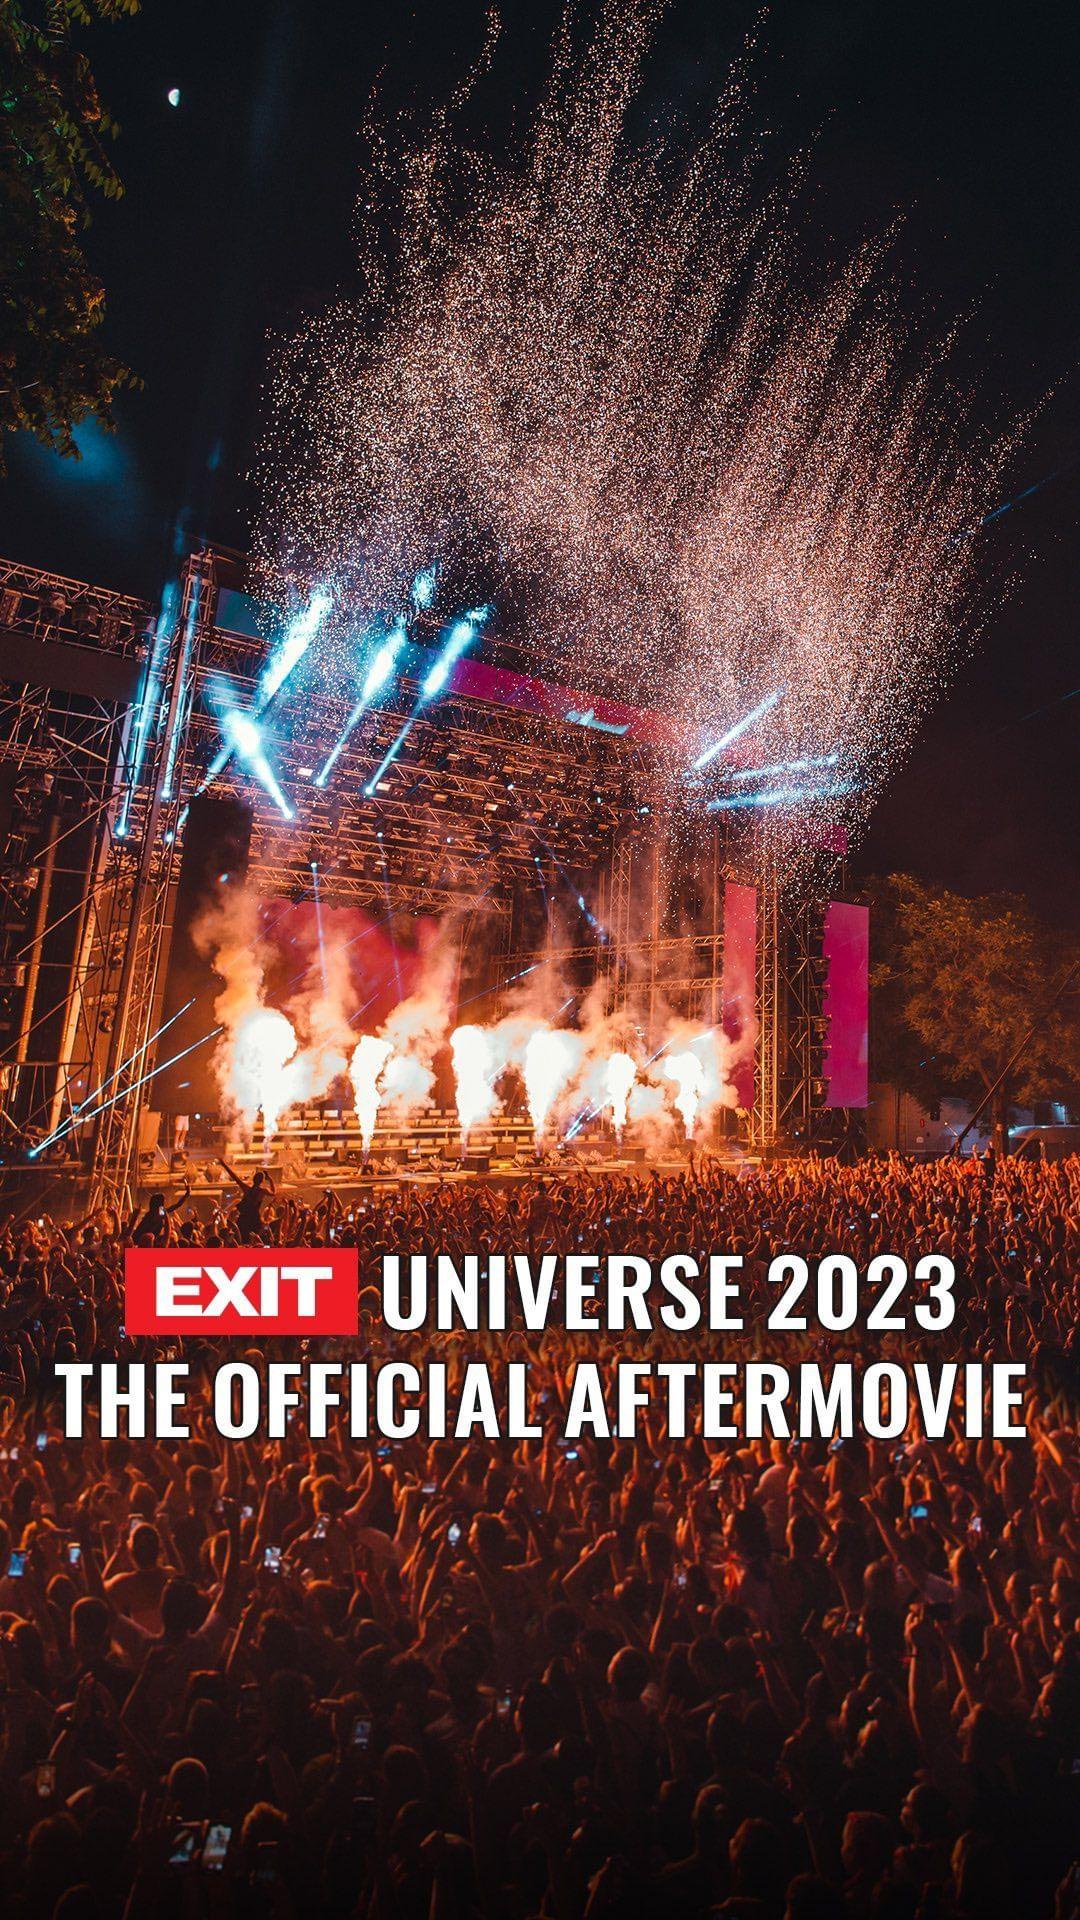 class="content__text"
 THE OFFICIAL AFTERMOVIE HAS LANDED: LOOK HOW BRIGHT YOU SHINED IN EXIT UNIVERSE! ✨

EXIT people, Magic people, this July, we wove the wildest dreams, fearless love, and boundless energy into a phenomenon: Our very own #EXIT2023 Universe! 🙌🎊

The memories we’ve made are not just fleeting moments —they are an eternal flame! 🔥

It’s in the beats that move you to your very core, it hides in the walls of our beautiful medieval Fort and its home is within each and every one of YOU, THE BRIGHTEST STARS! 🌟

Let these memories shine as a reminder that everything we envision, WE CAN CREATE - TOGETHER! 💖

Already dreaming about 11-14 July at EXIT 2024? 
It gets real as ticket sale starts on OCTOBER 10 AT NOON! 🎉

Keep showing your shine and see you at exitfest.org! 
 